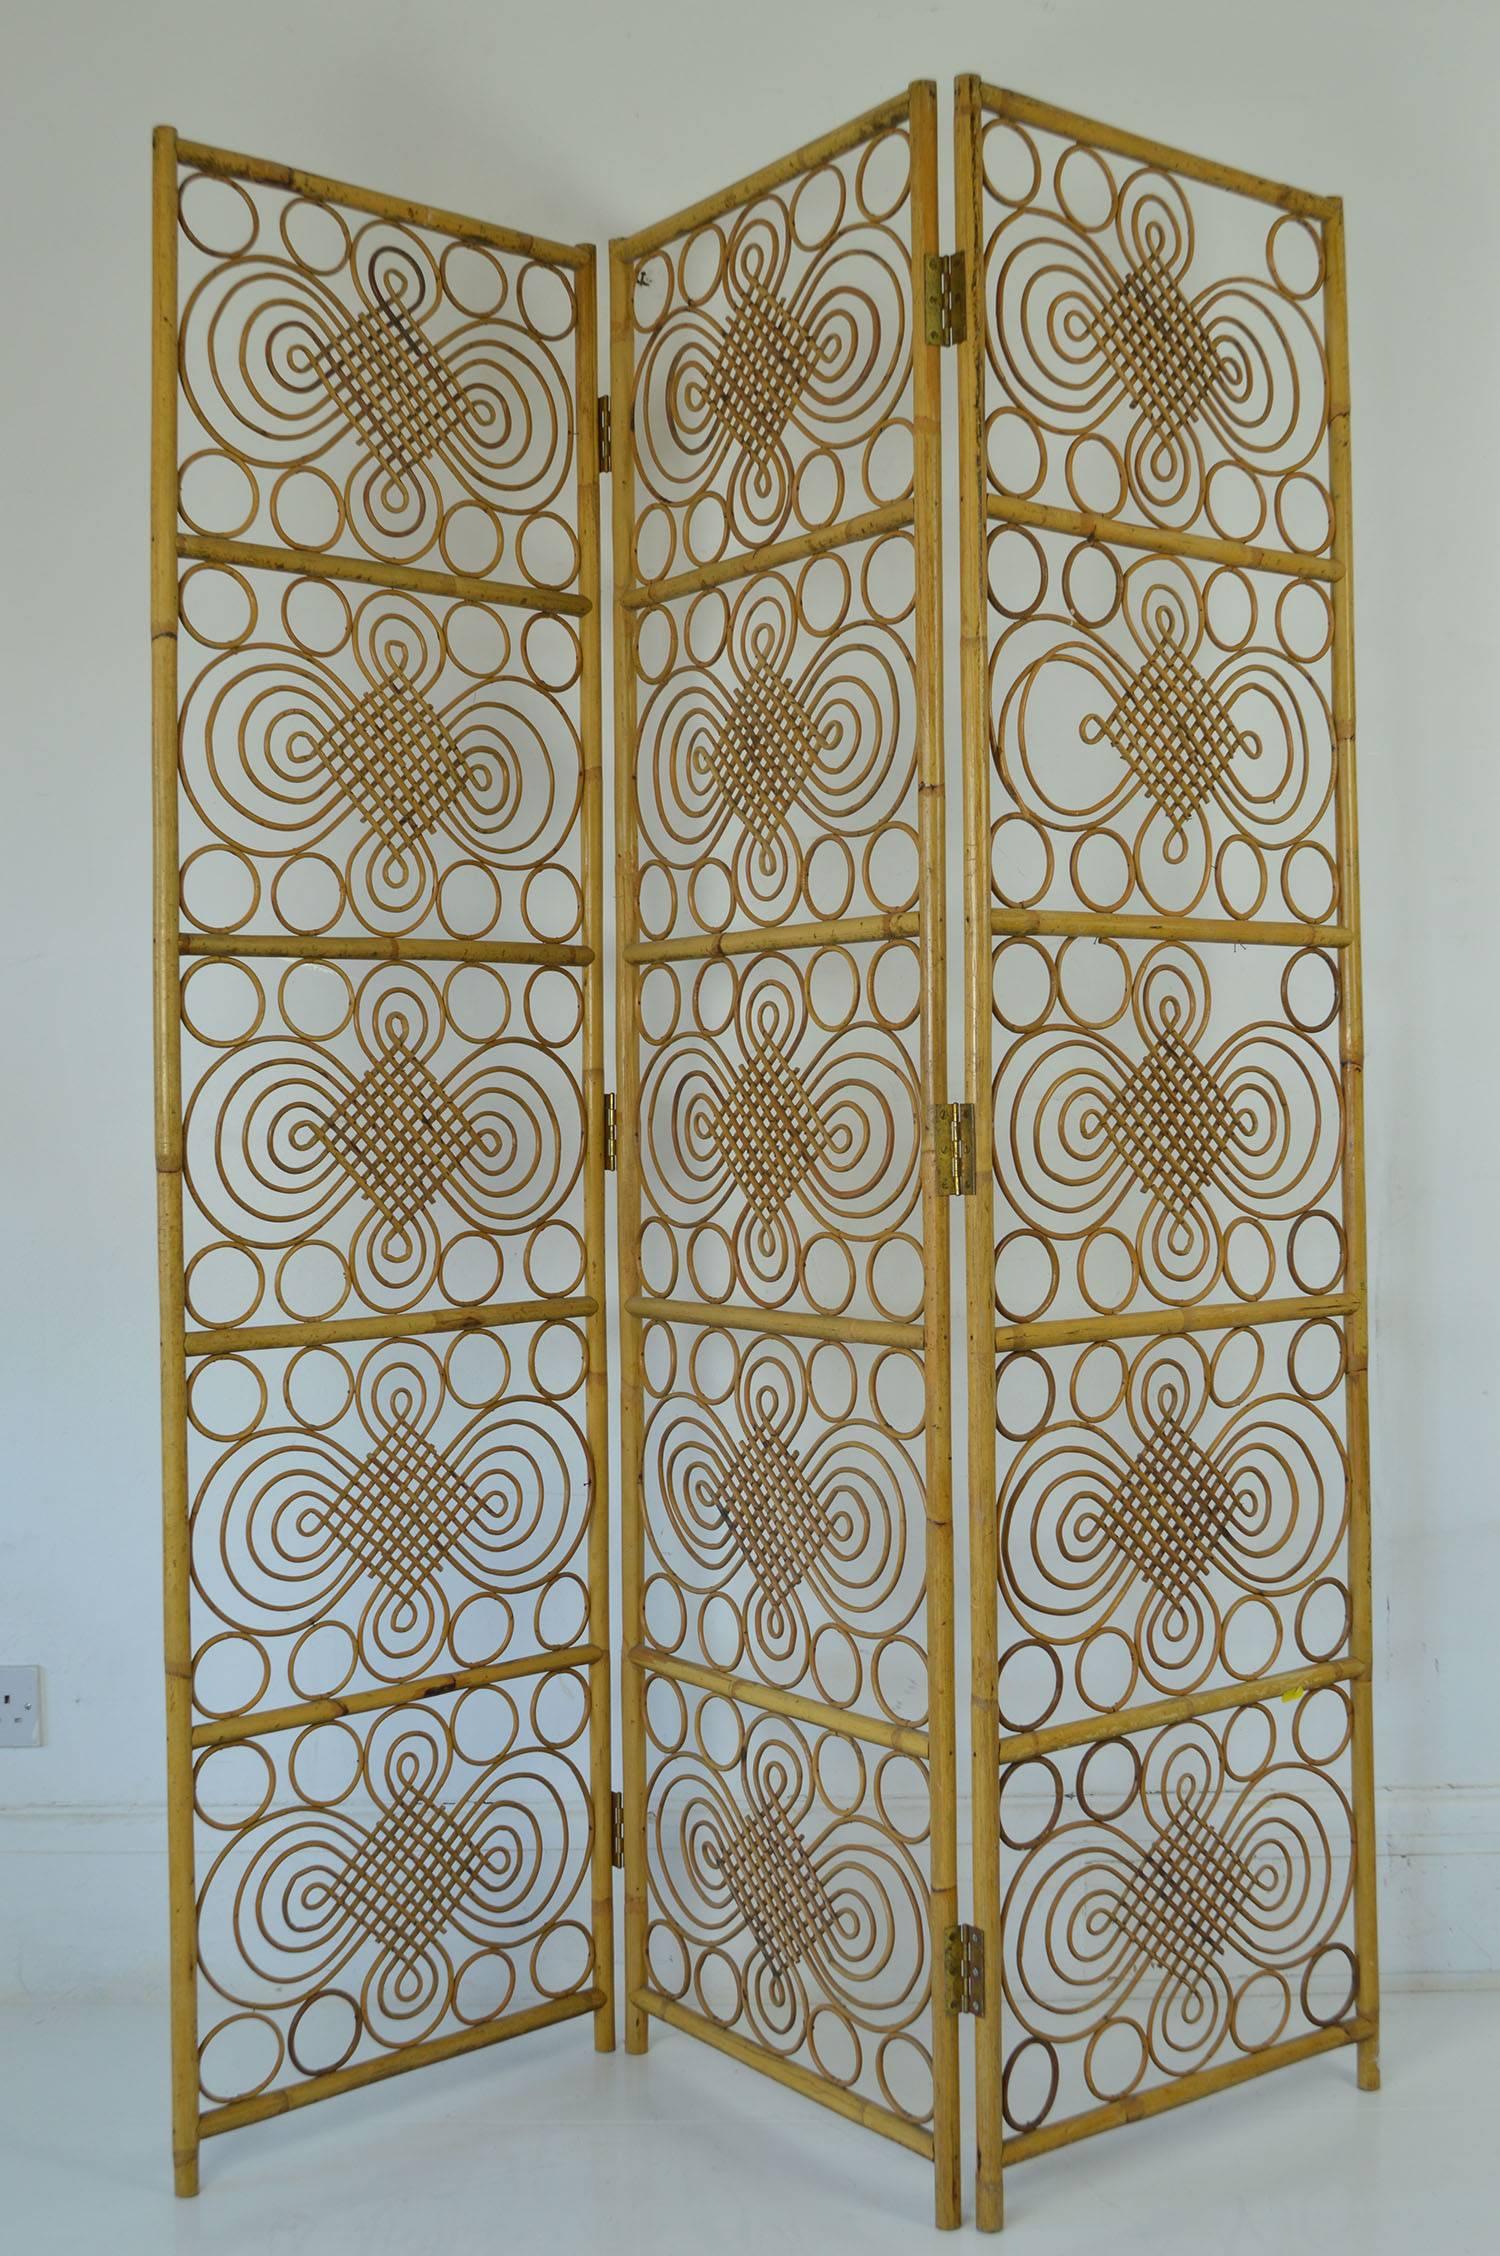 Great three-panel folding screen. Really good quality rattan work.

Very iconic 1960s look about it.

Designer and maker not known.

Stable when it is opened up.

Good quality brass hinges.

Two of the panels are in good condition. On one